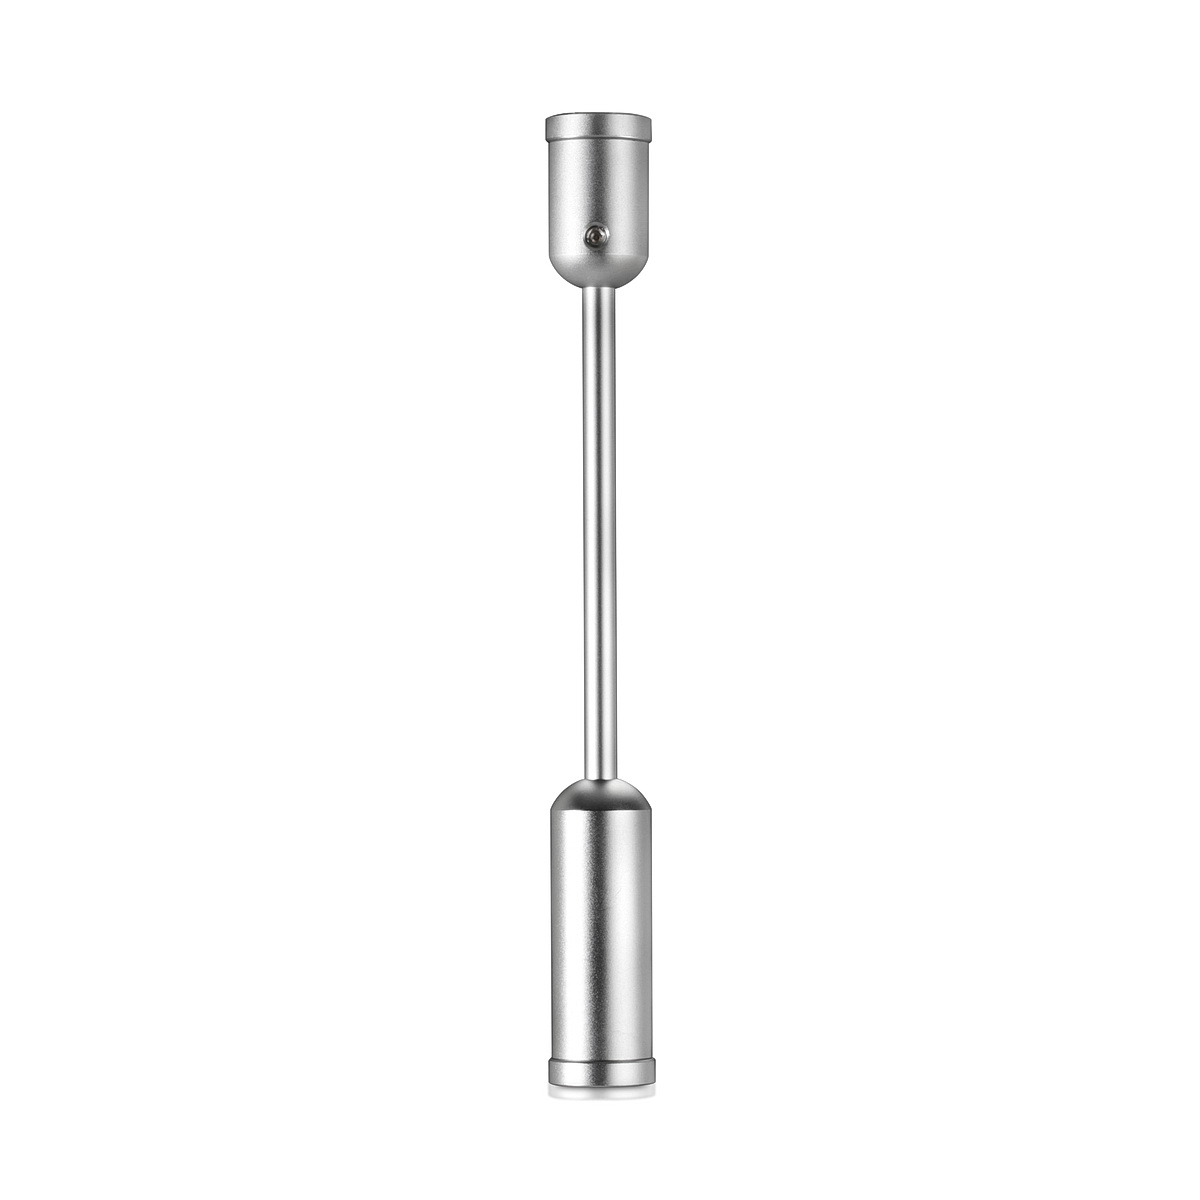 Ceiling to Floor, Aluminum Clear Anodized With 1/4'' Diameter Rod Kit - 59'' Length